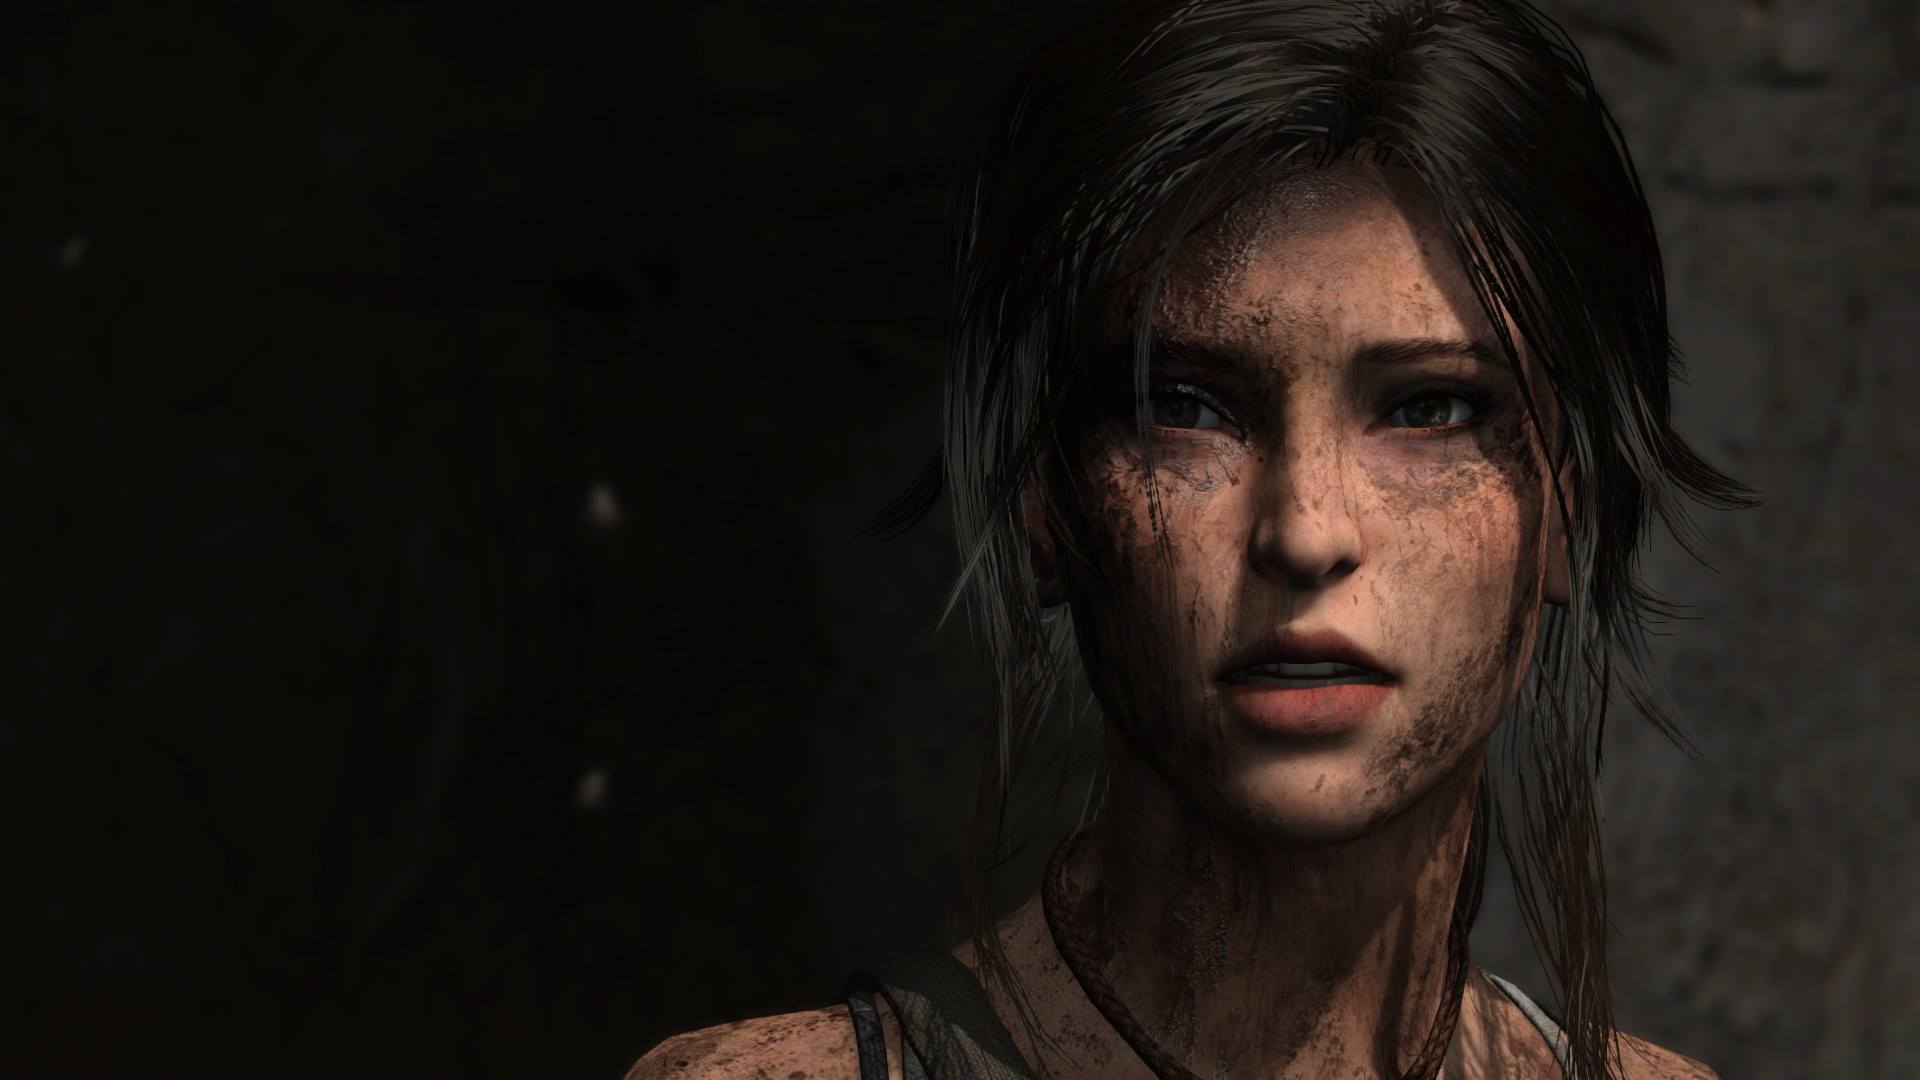 New Tomb Raider Game: Rise of The Tomb Raider Announced